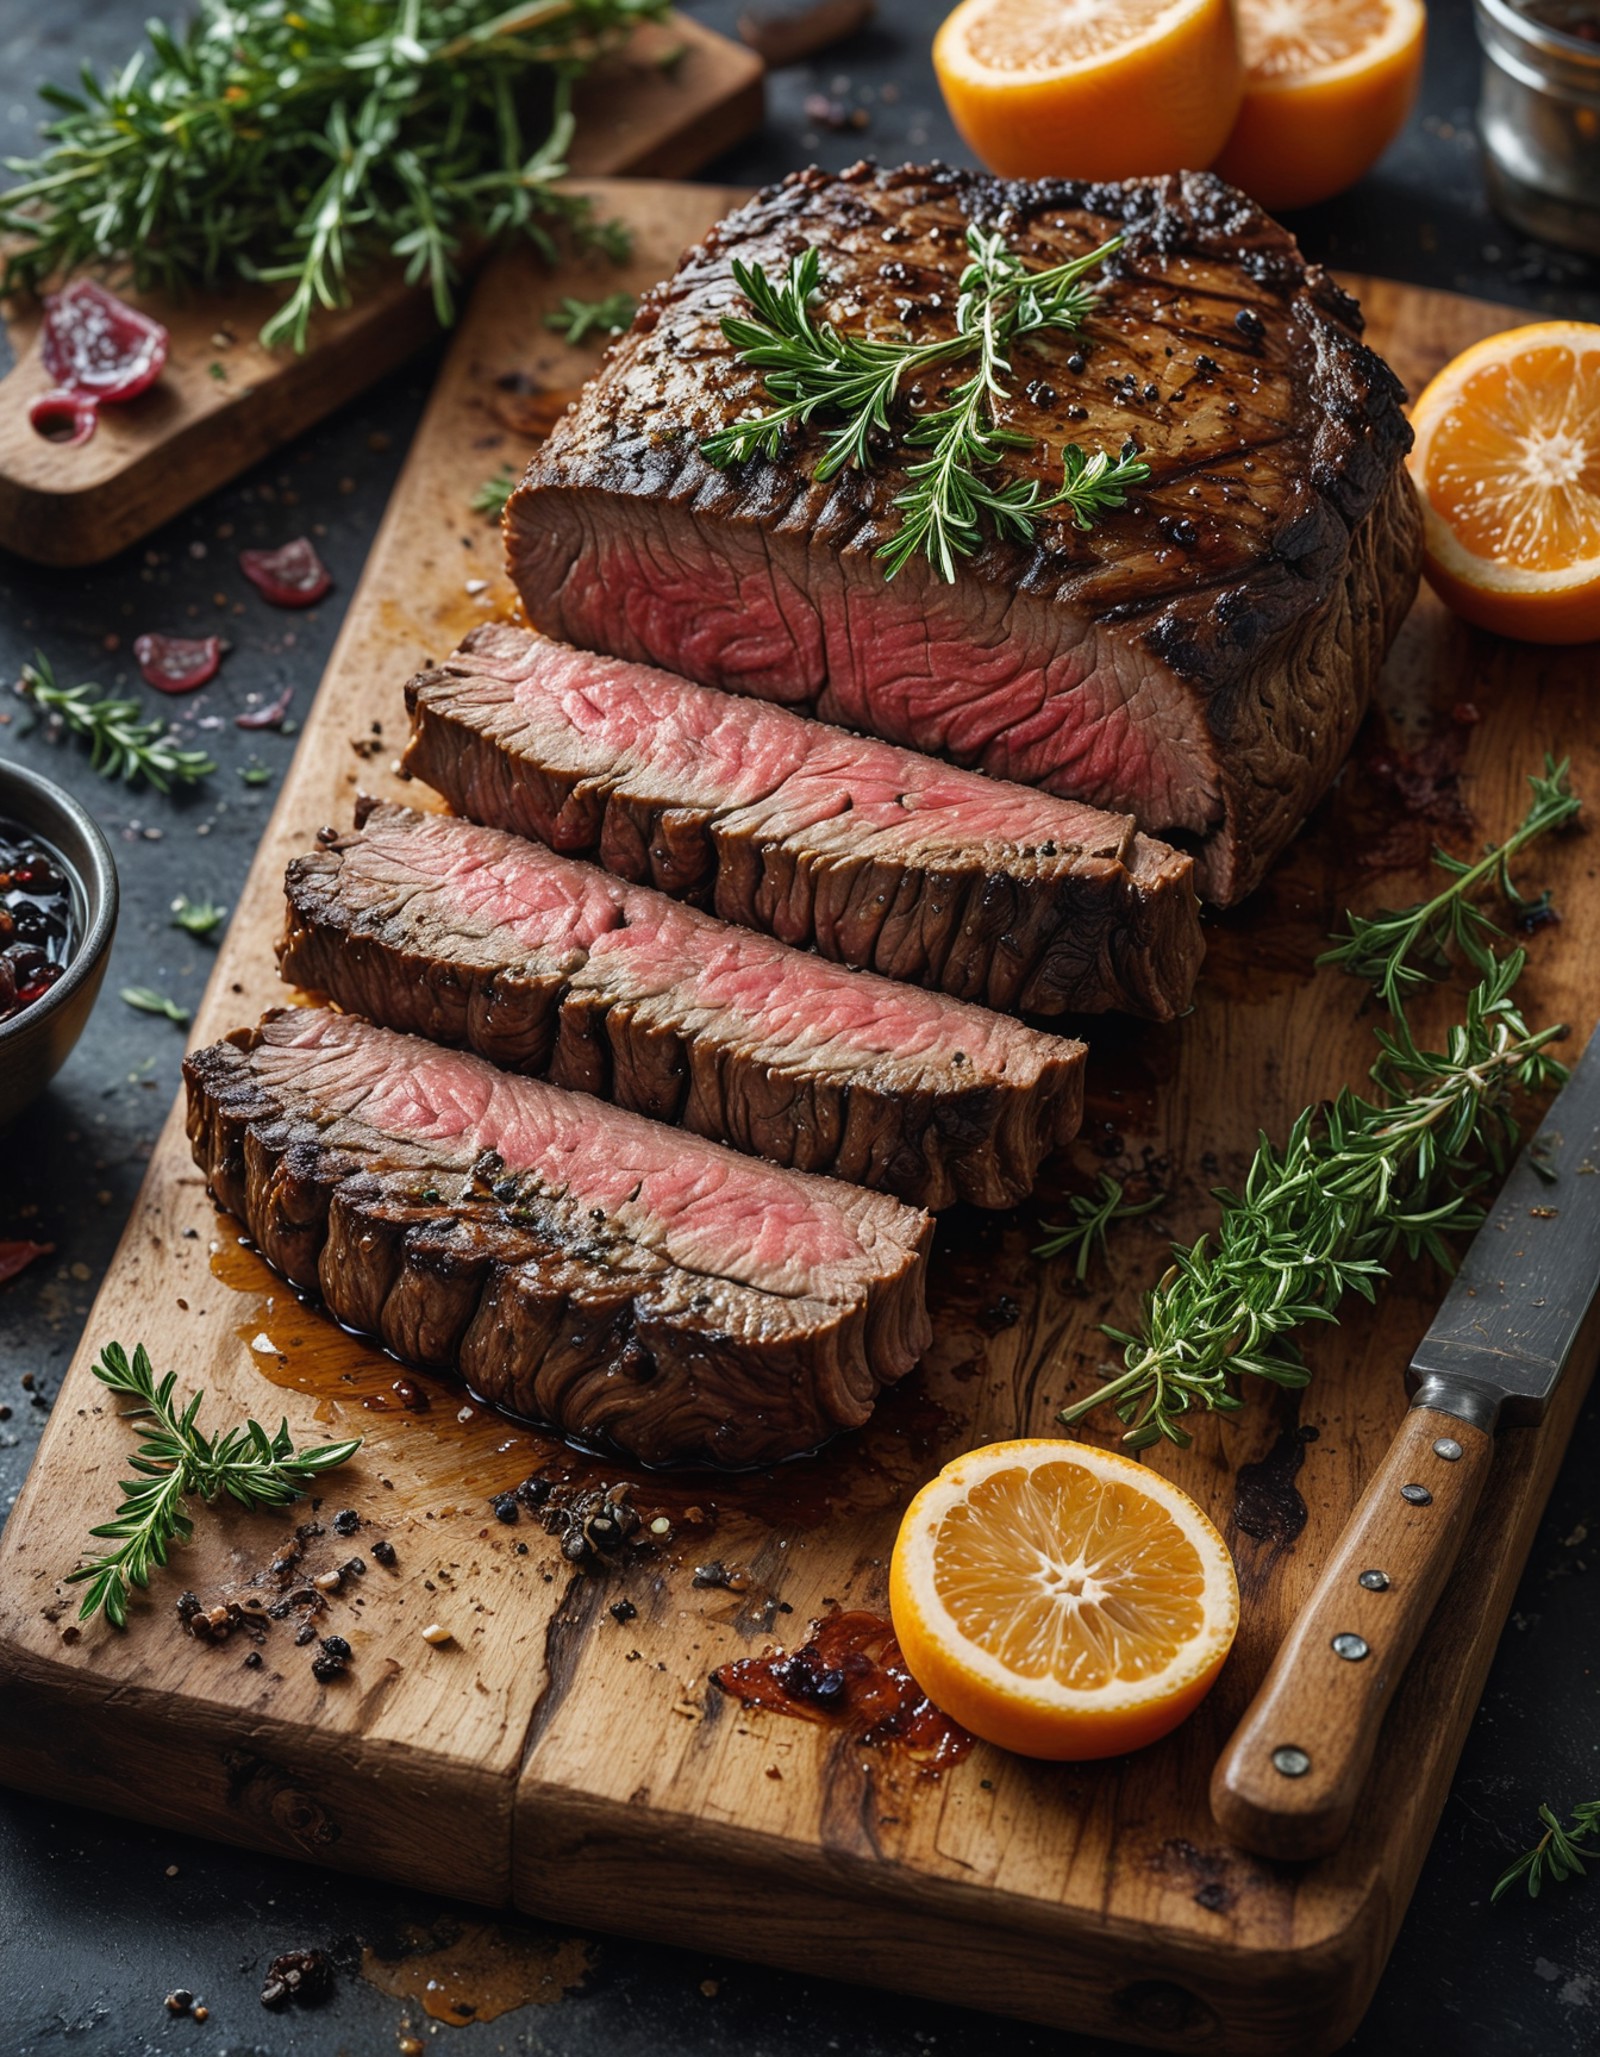 , juicy steak cooked to perfection. The steak should be grilled, with visible grill marks and a slightly charred exterior....